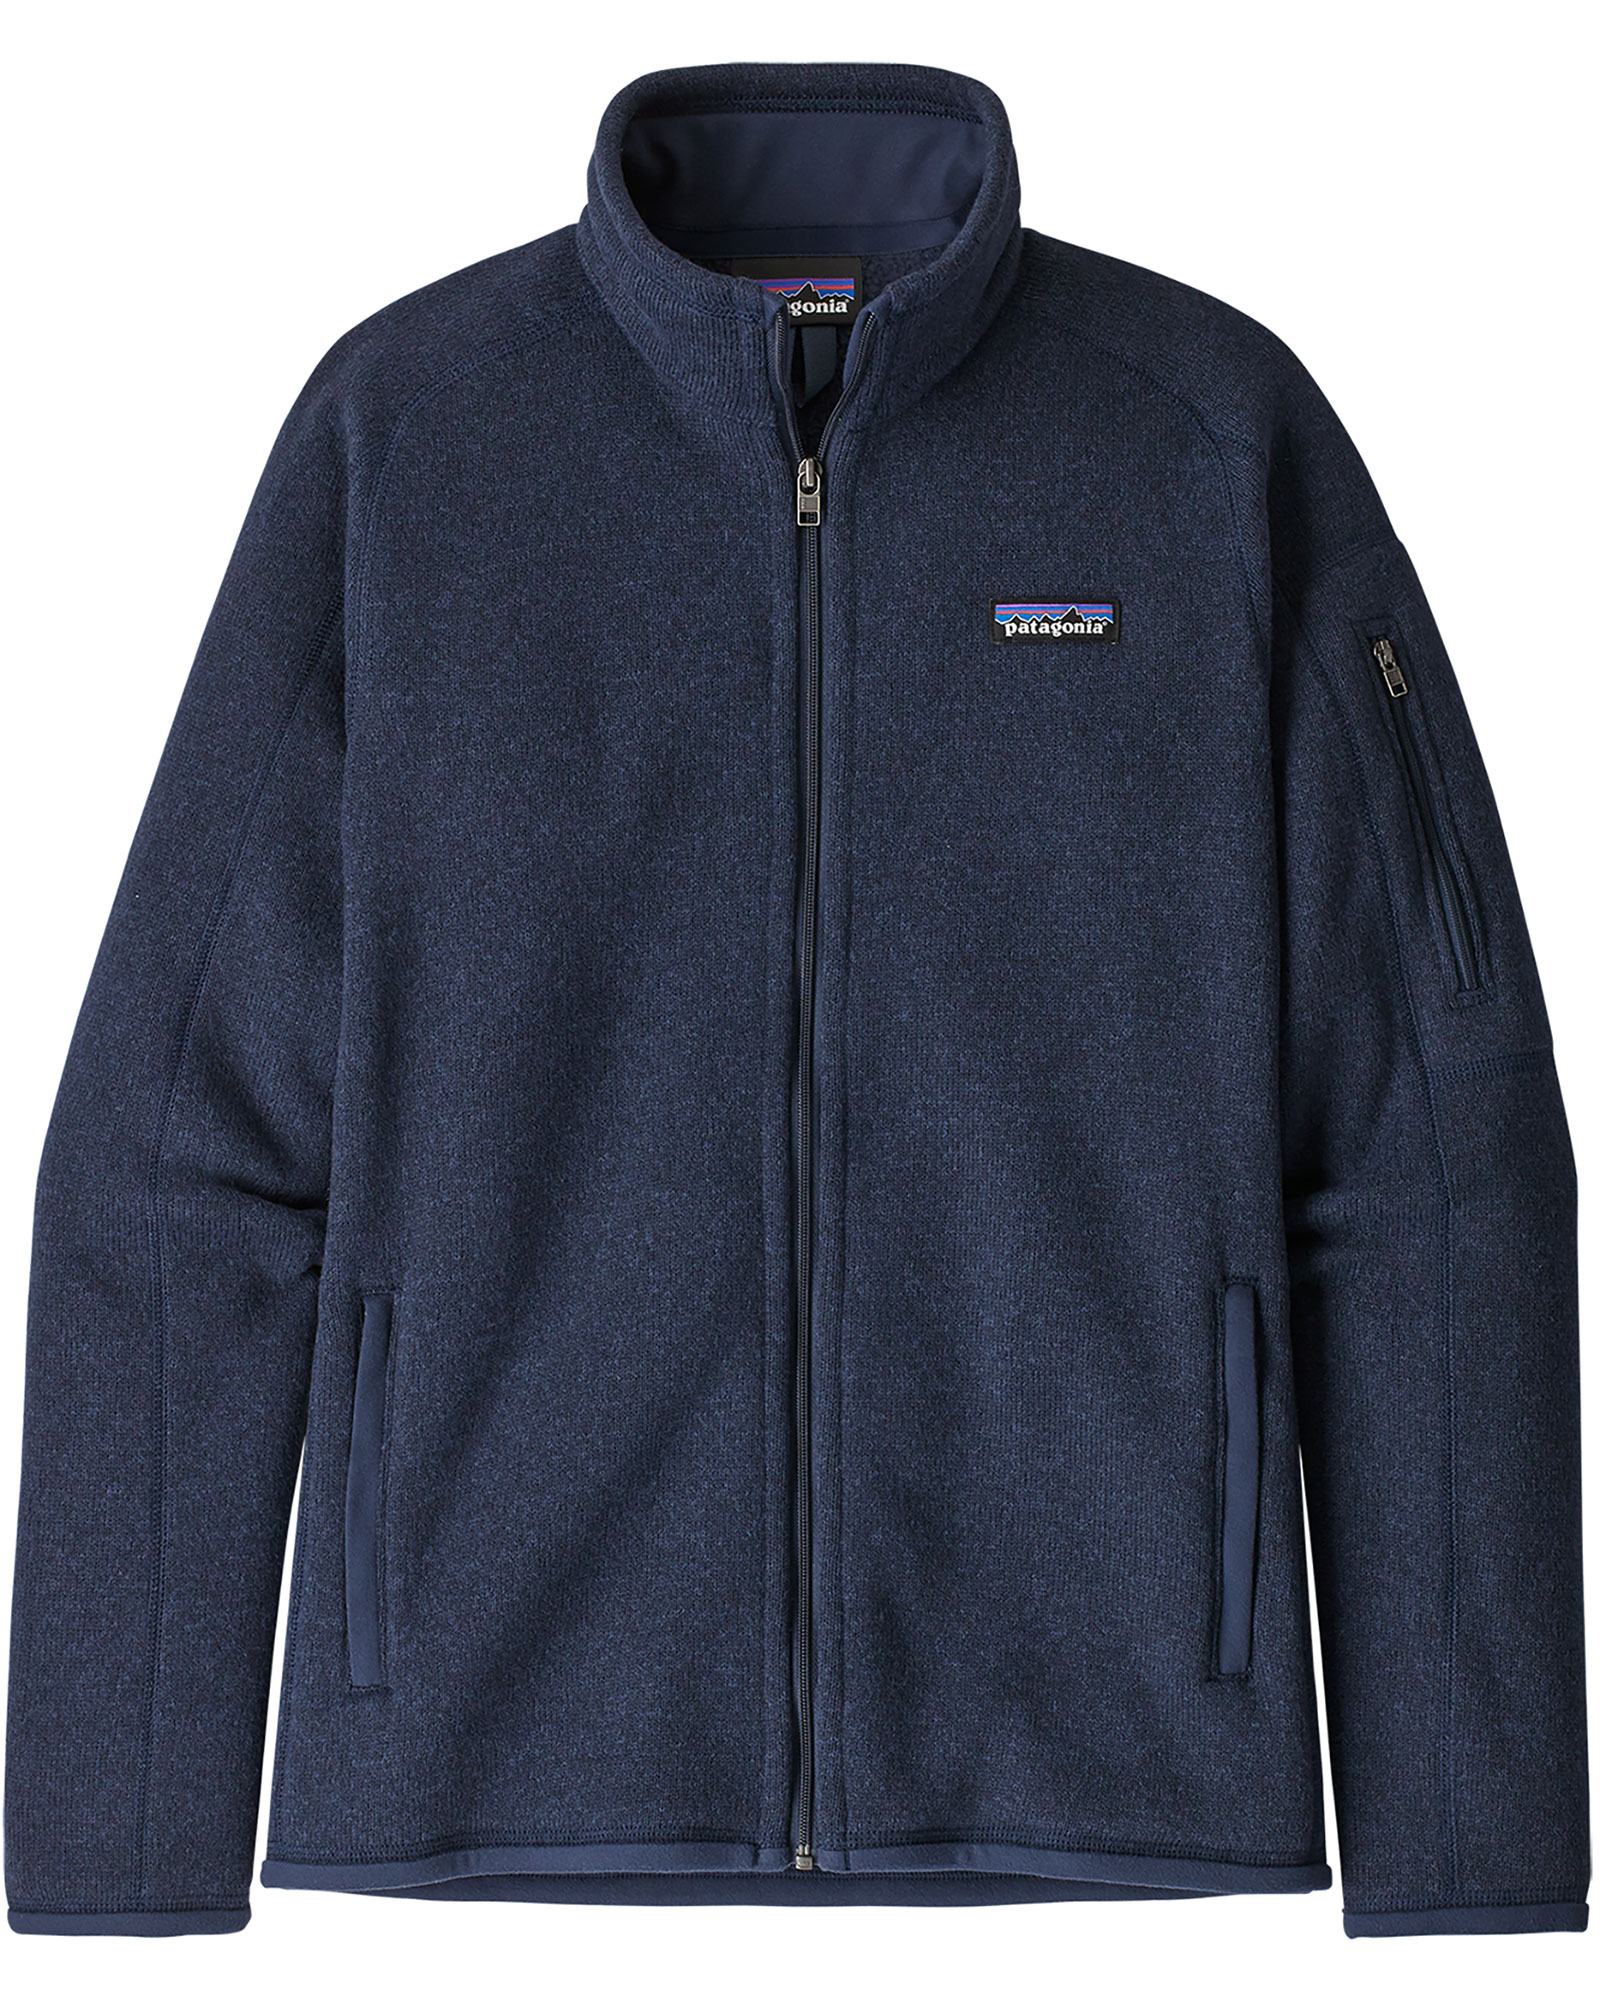 Patagonia Better Sweater Women’s Jacket - New Navy S